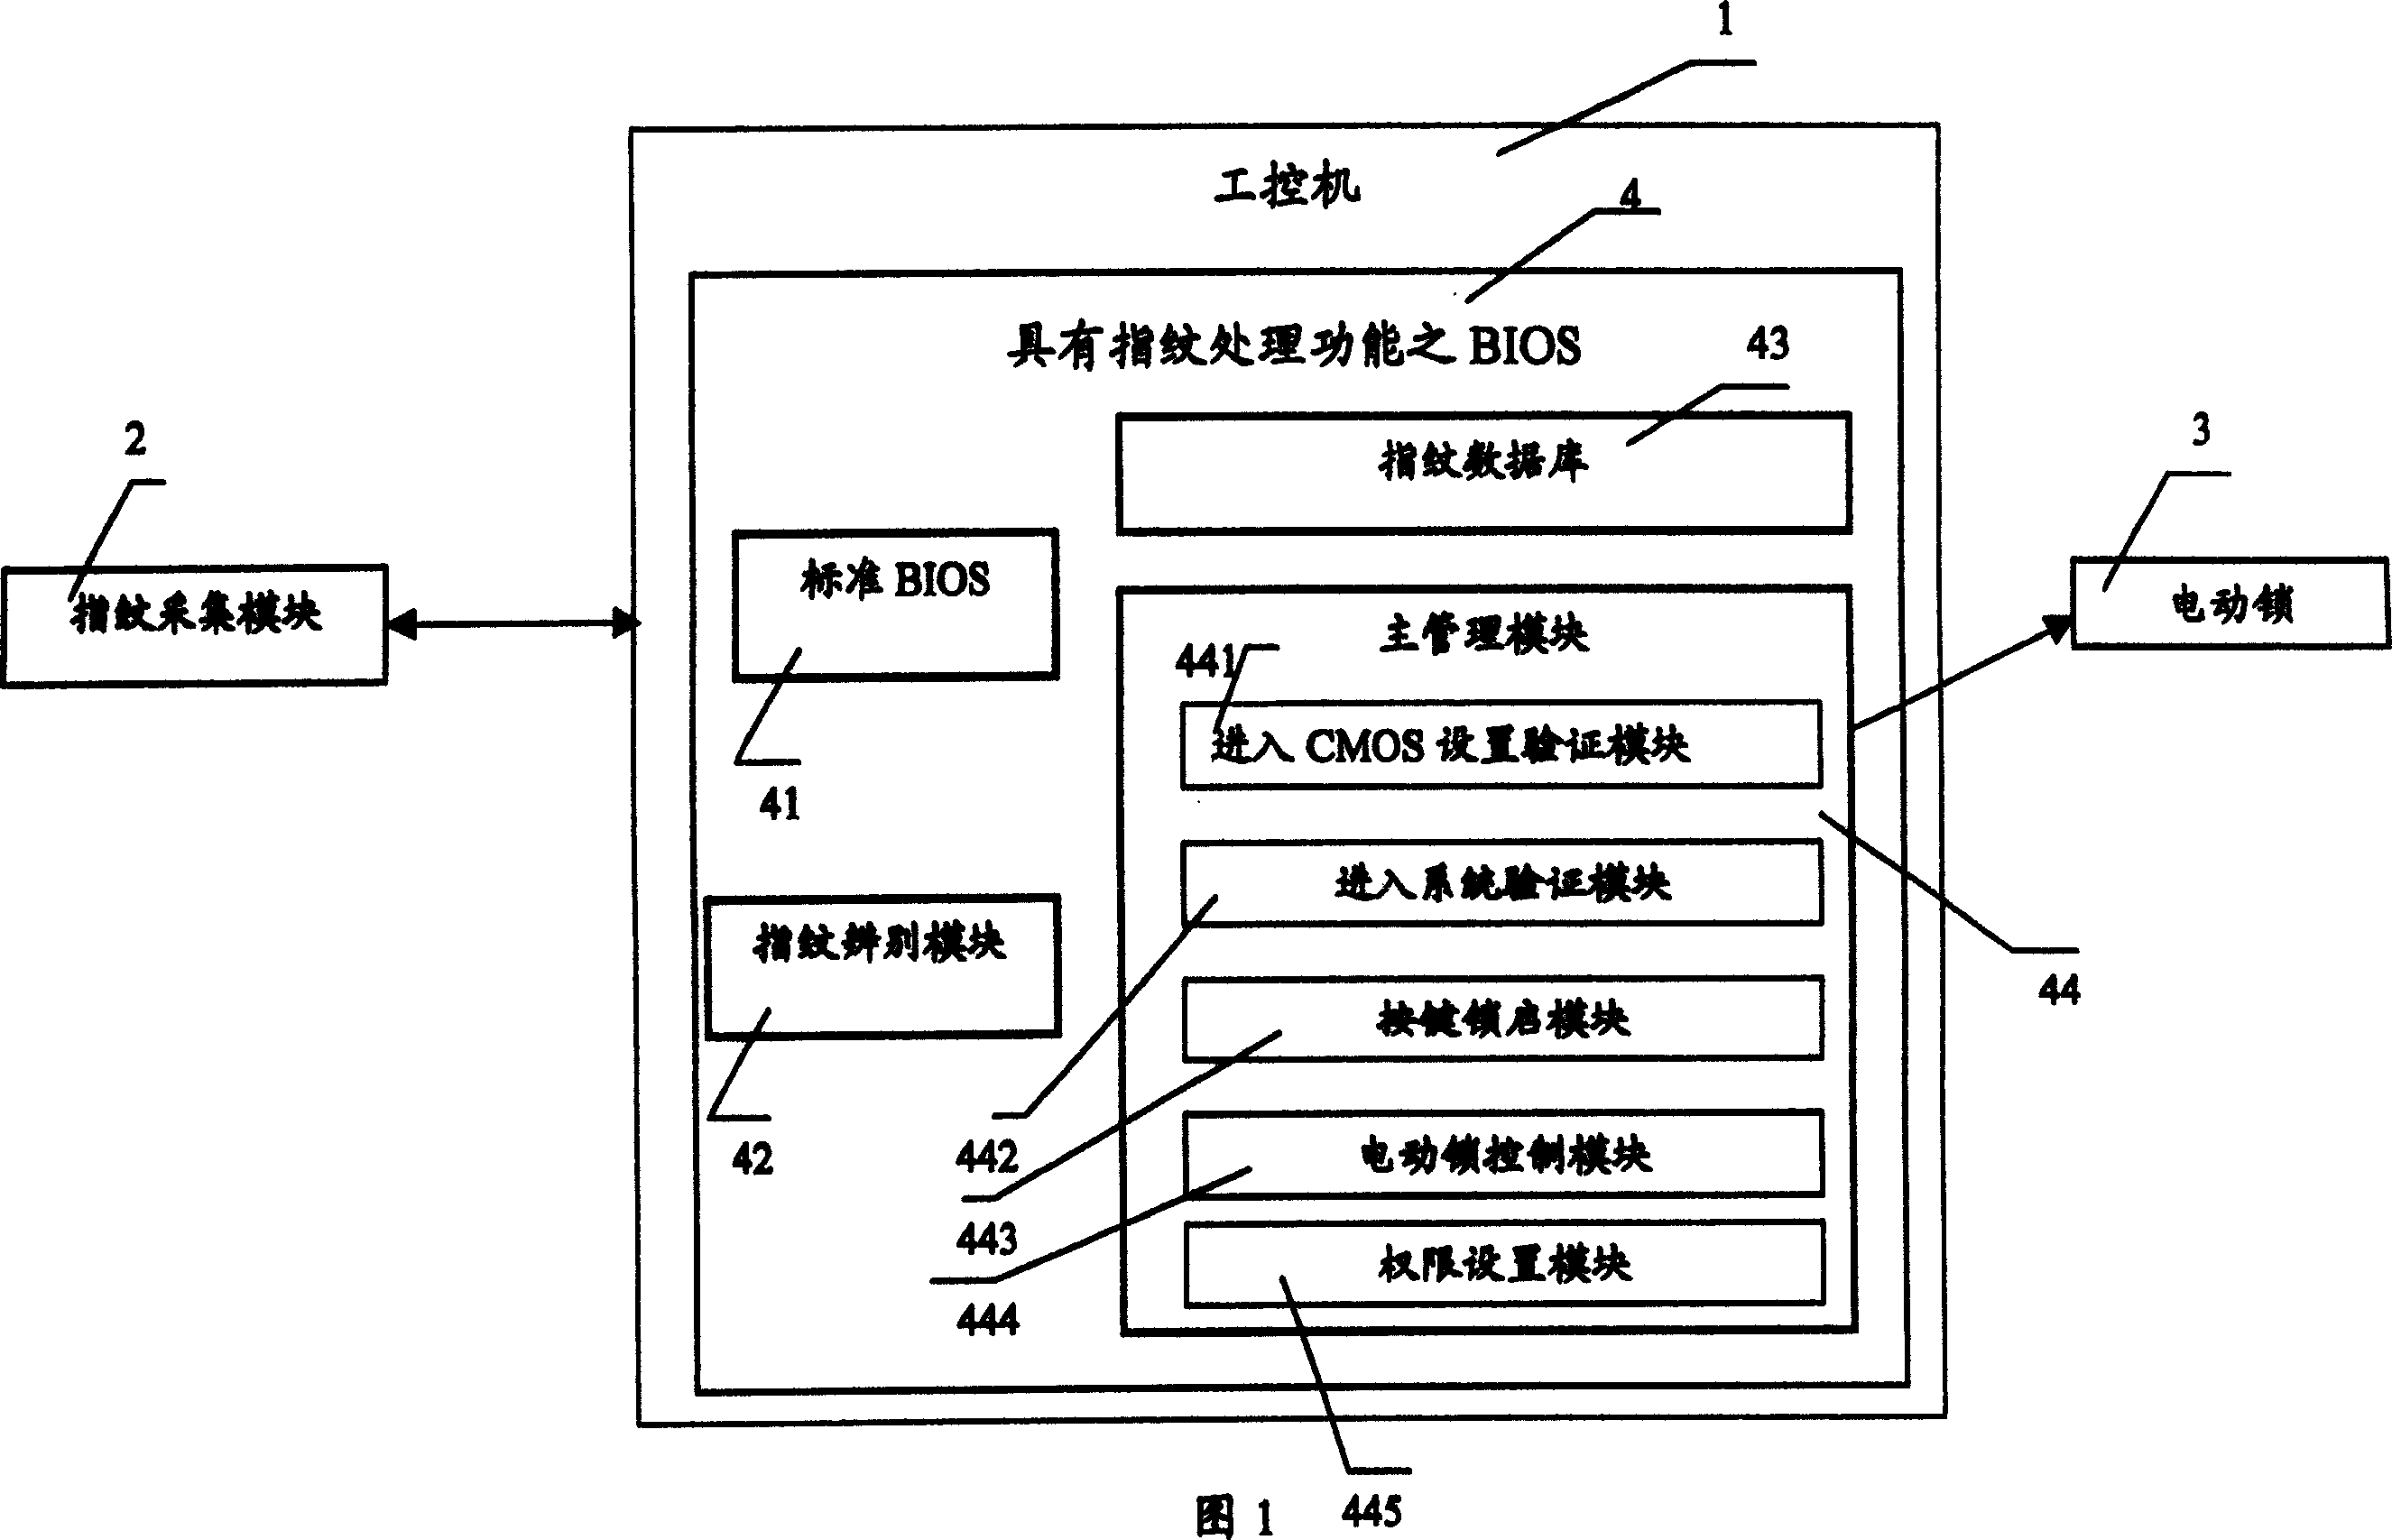 Safety industrial control system with fingerprint encryption